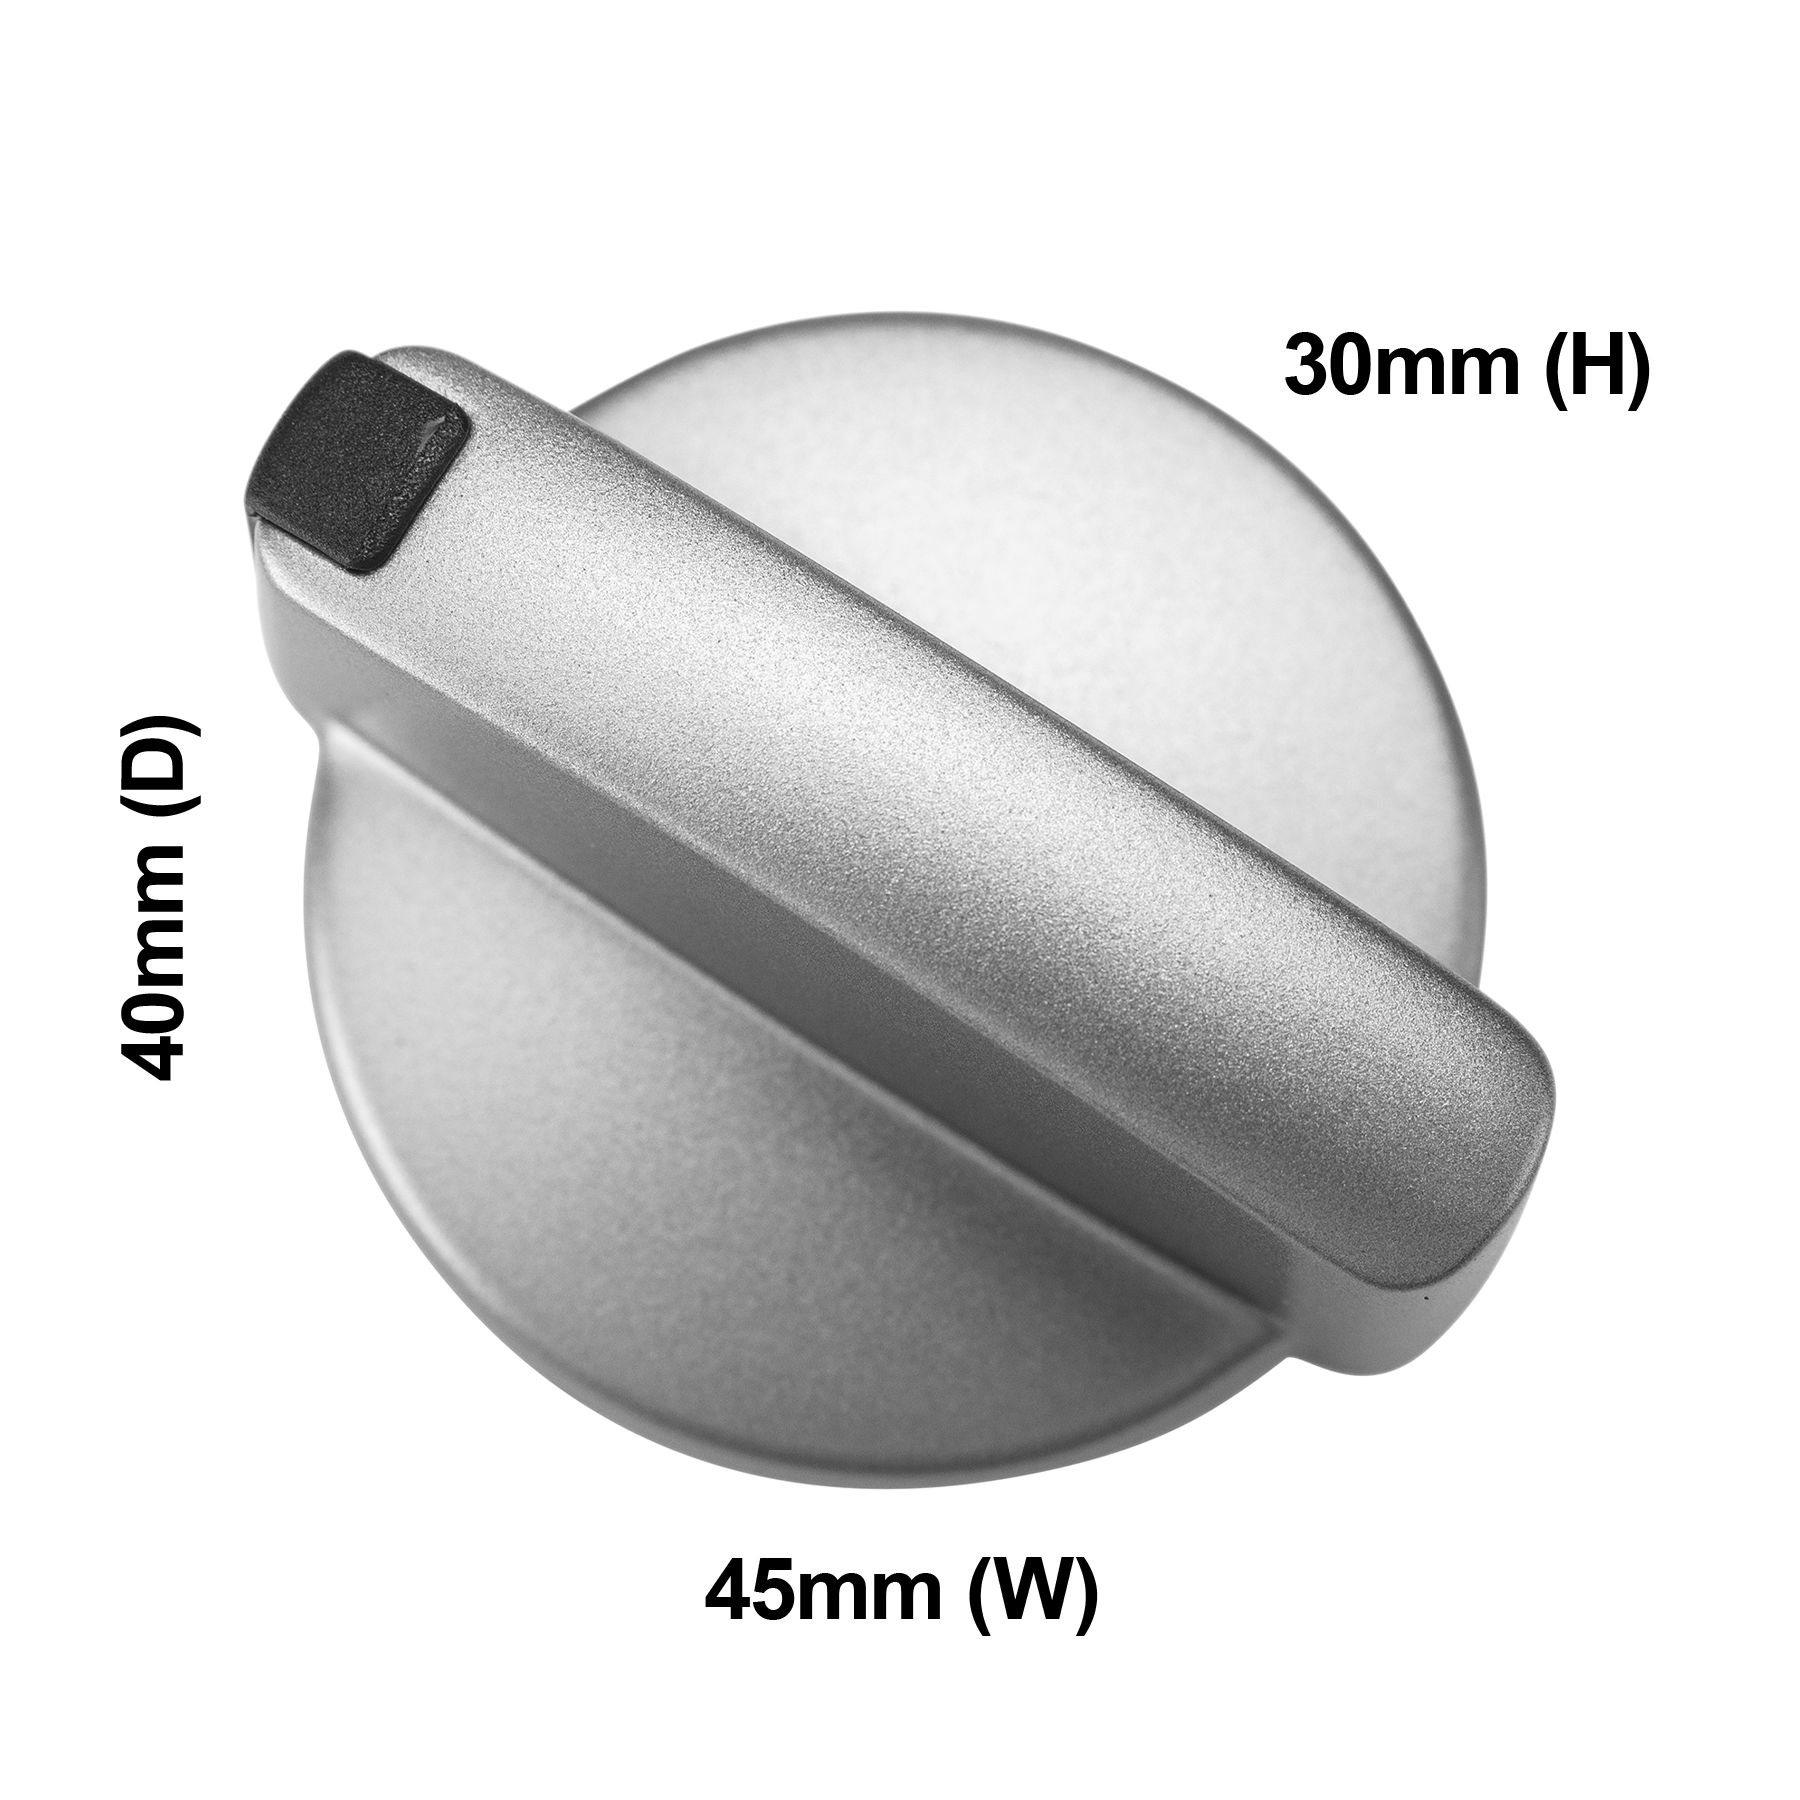 /globalassets/images/accessory-images/sku305552405-knob-stainless-steel-appearance-top.png